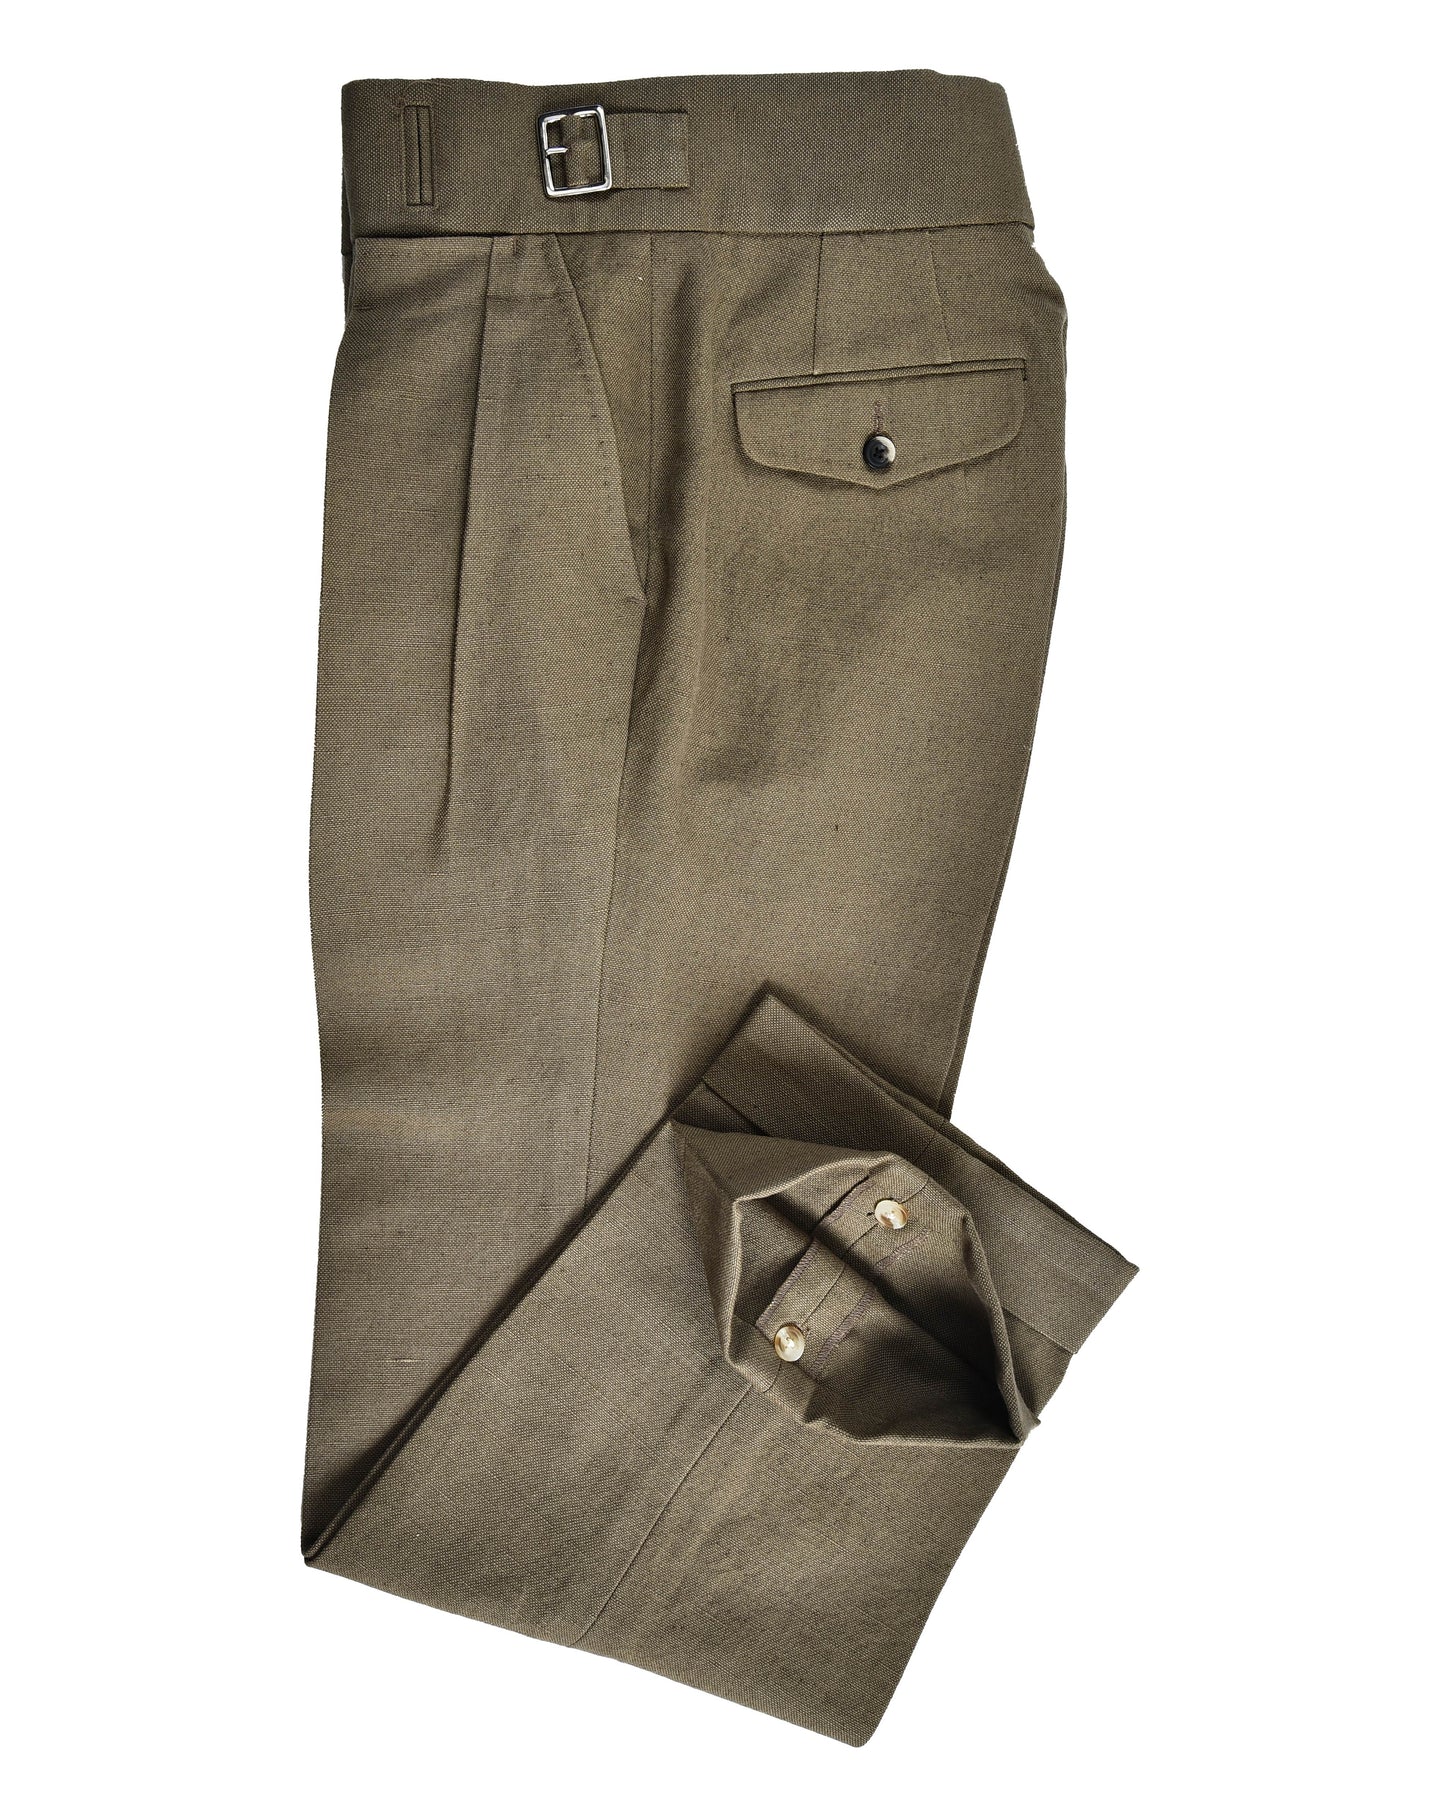 Gurkha Pant in Linen Cotton Canvas Military Olive